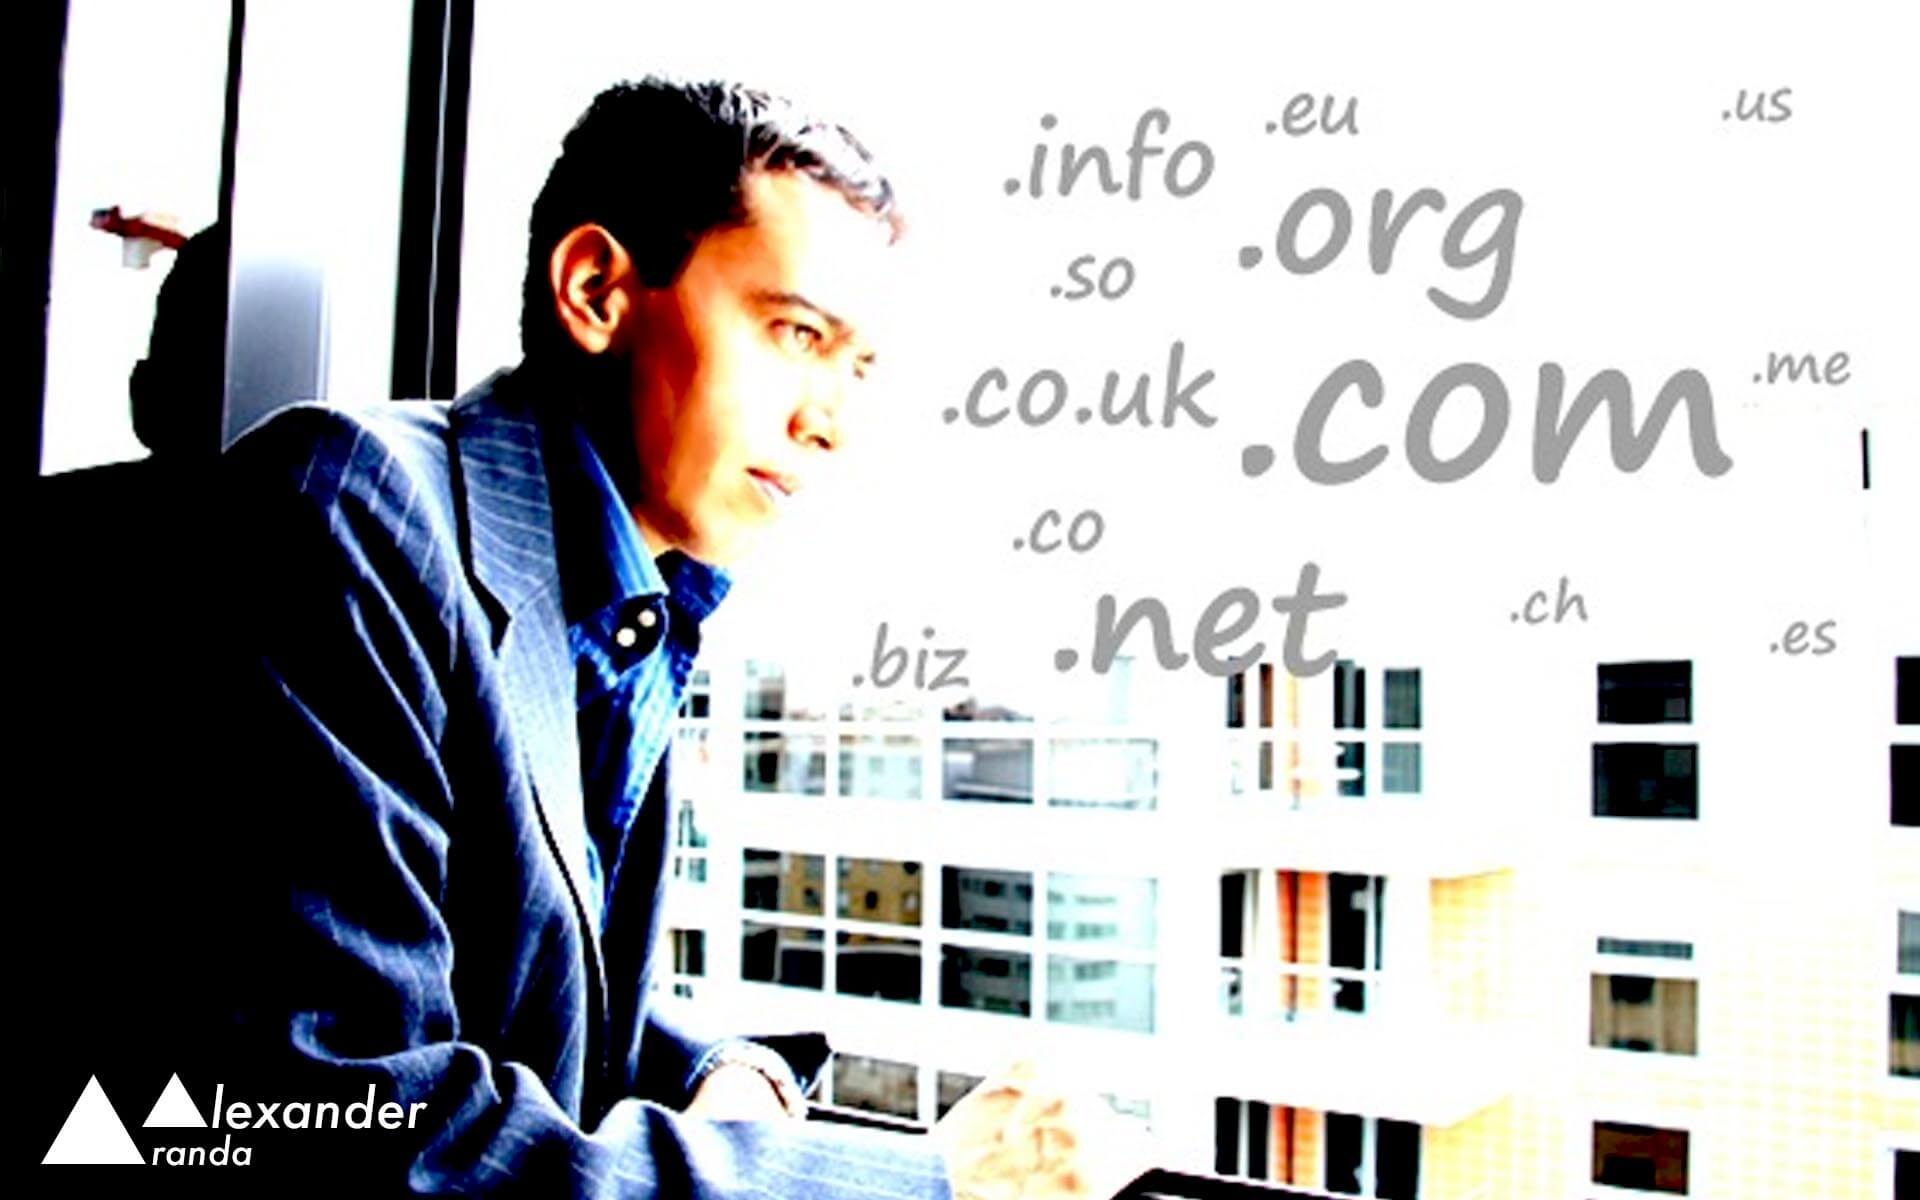 Alexander Aranda surrounded by domain extensions